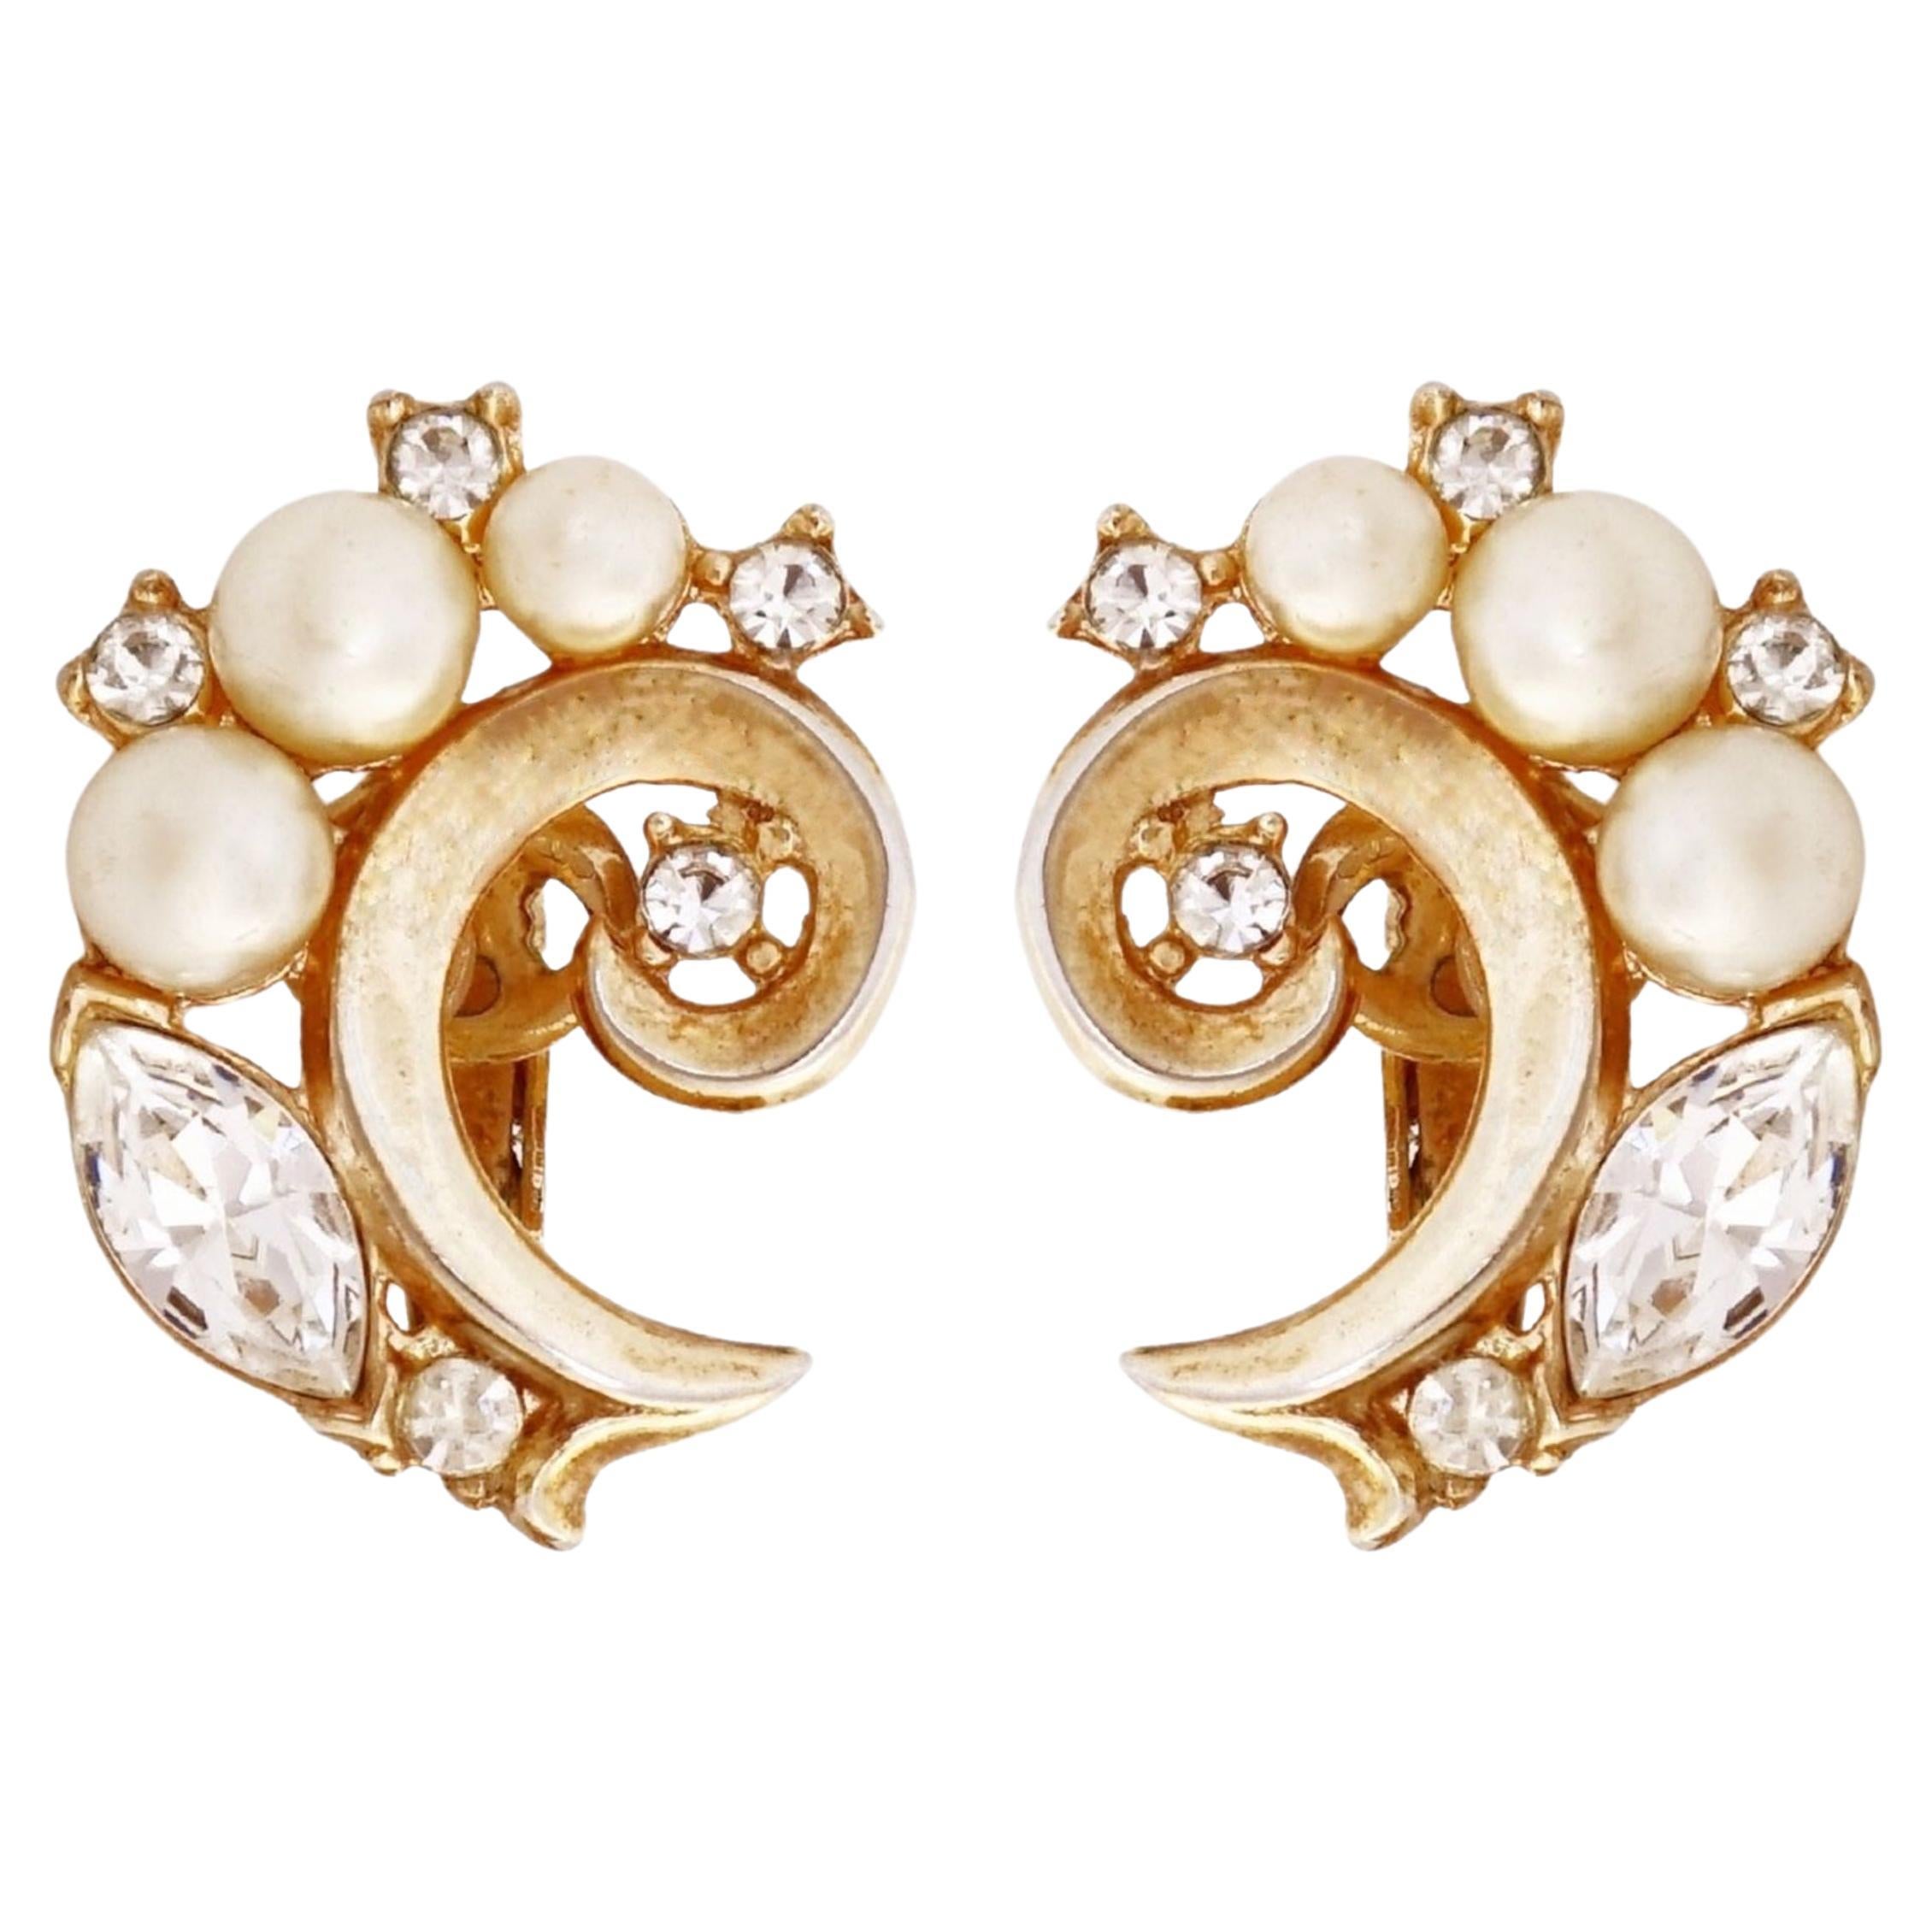 Gold Swirl Cocktail Earrings With Pearls and Crystals By Crown Trifari, 1950s For Sale